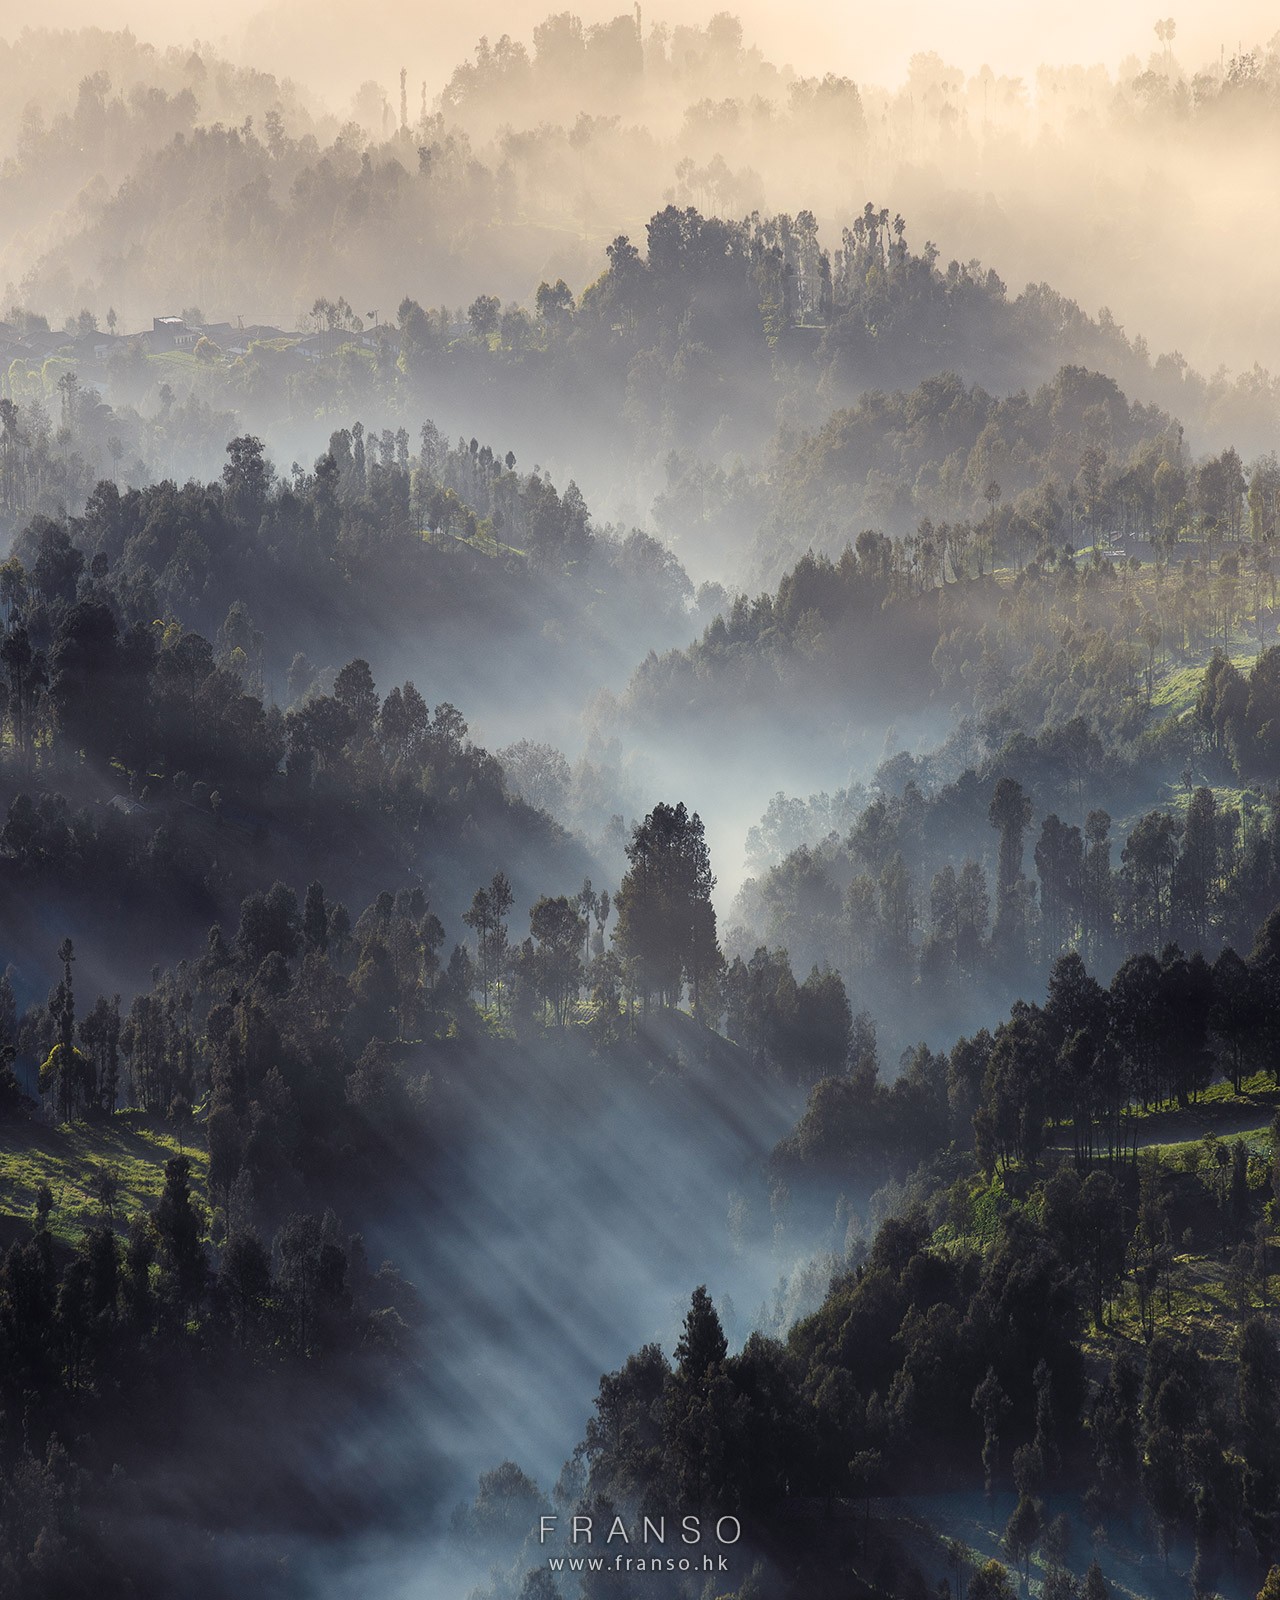 Landscape | Overseas | The mist and the forest | 